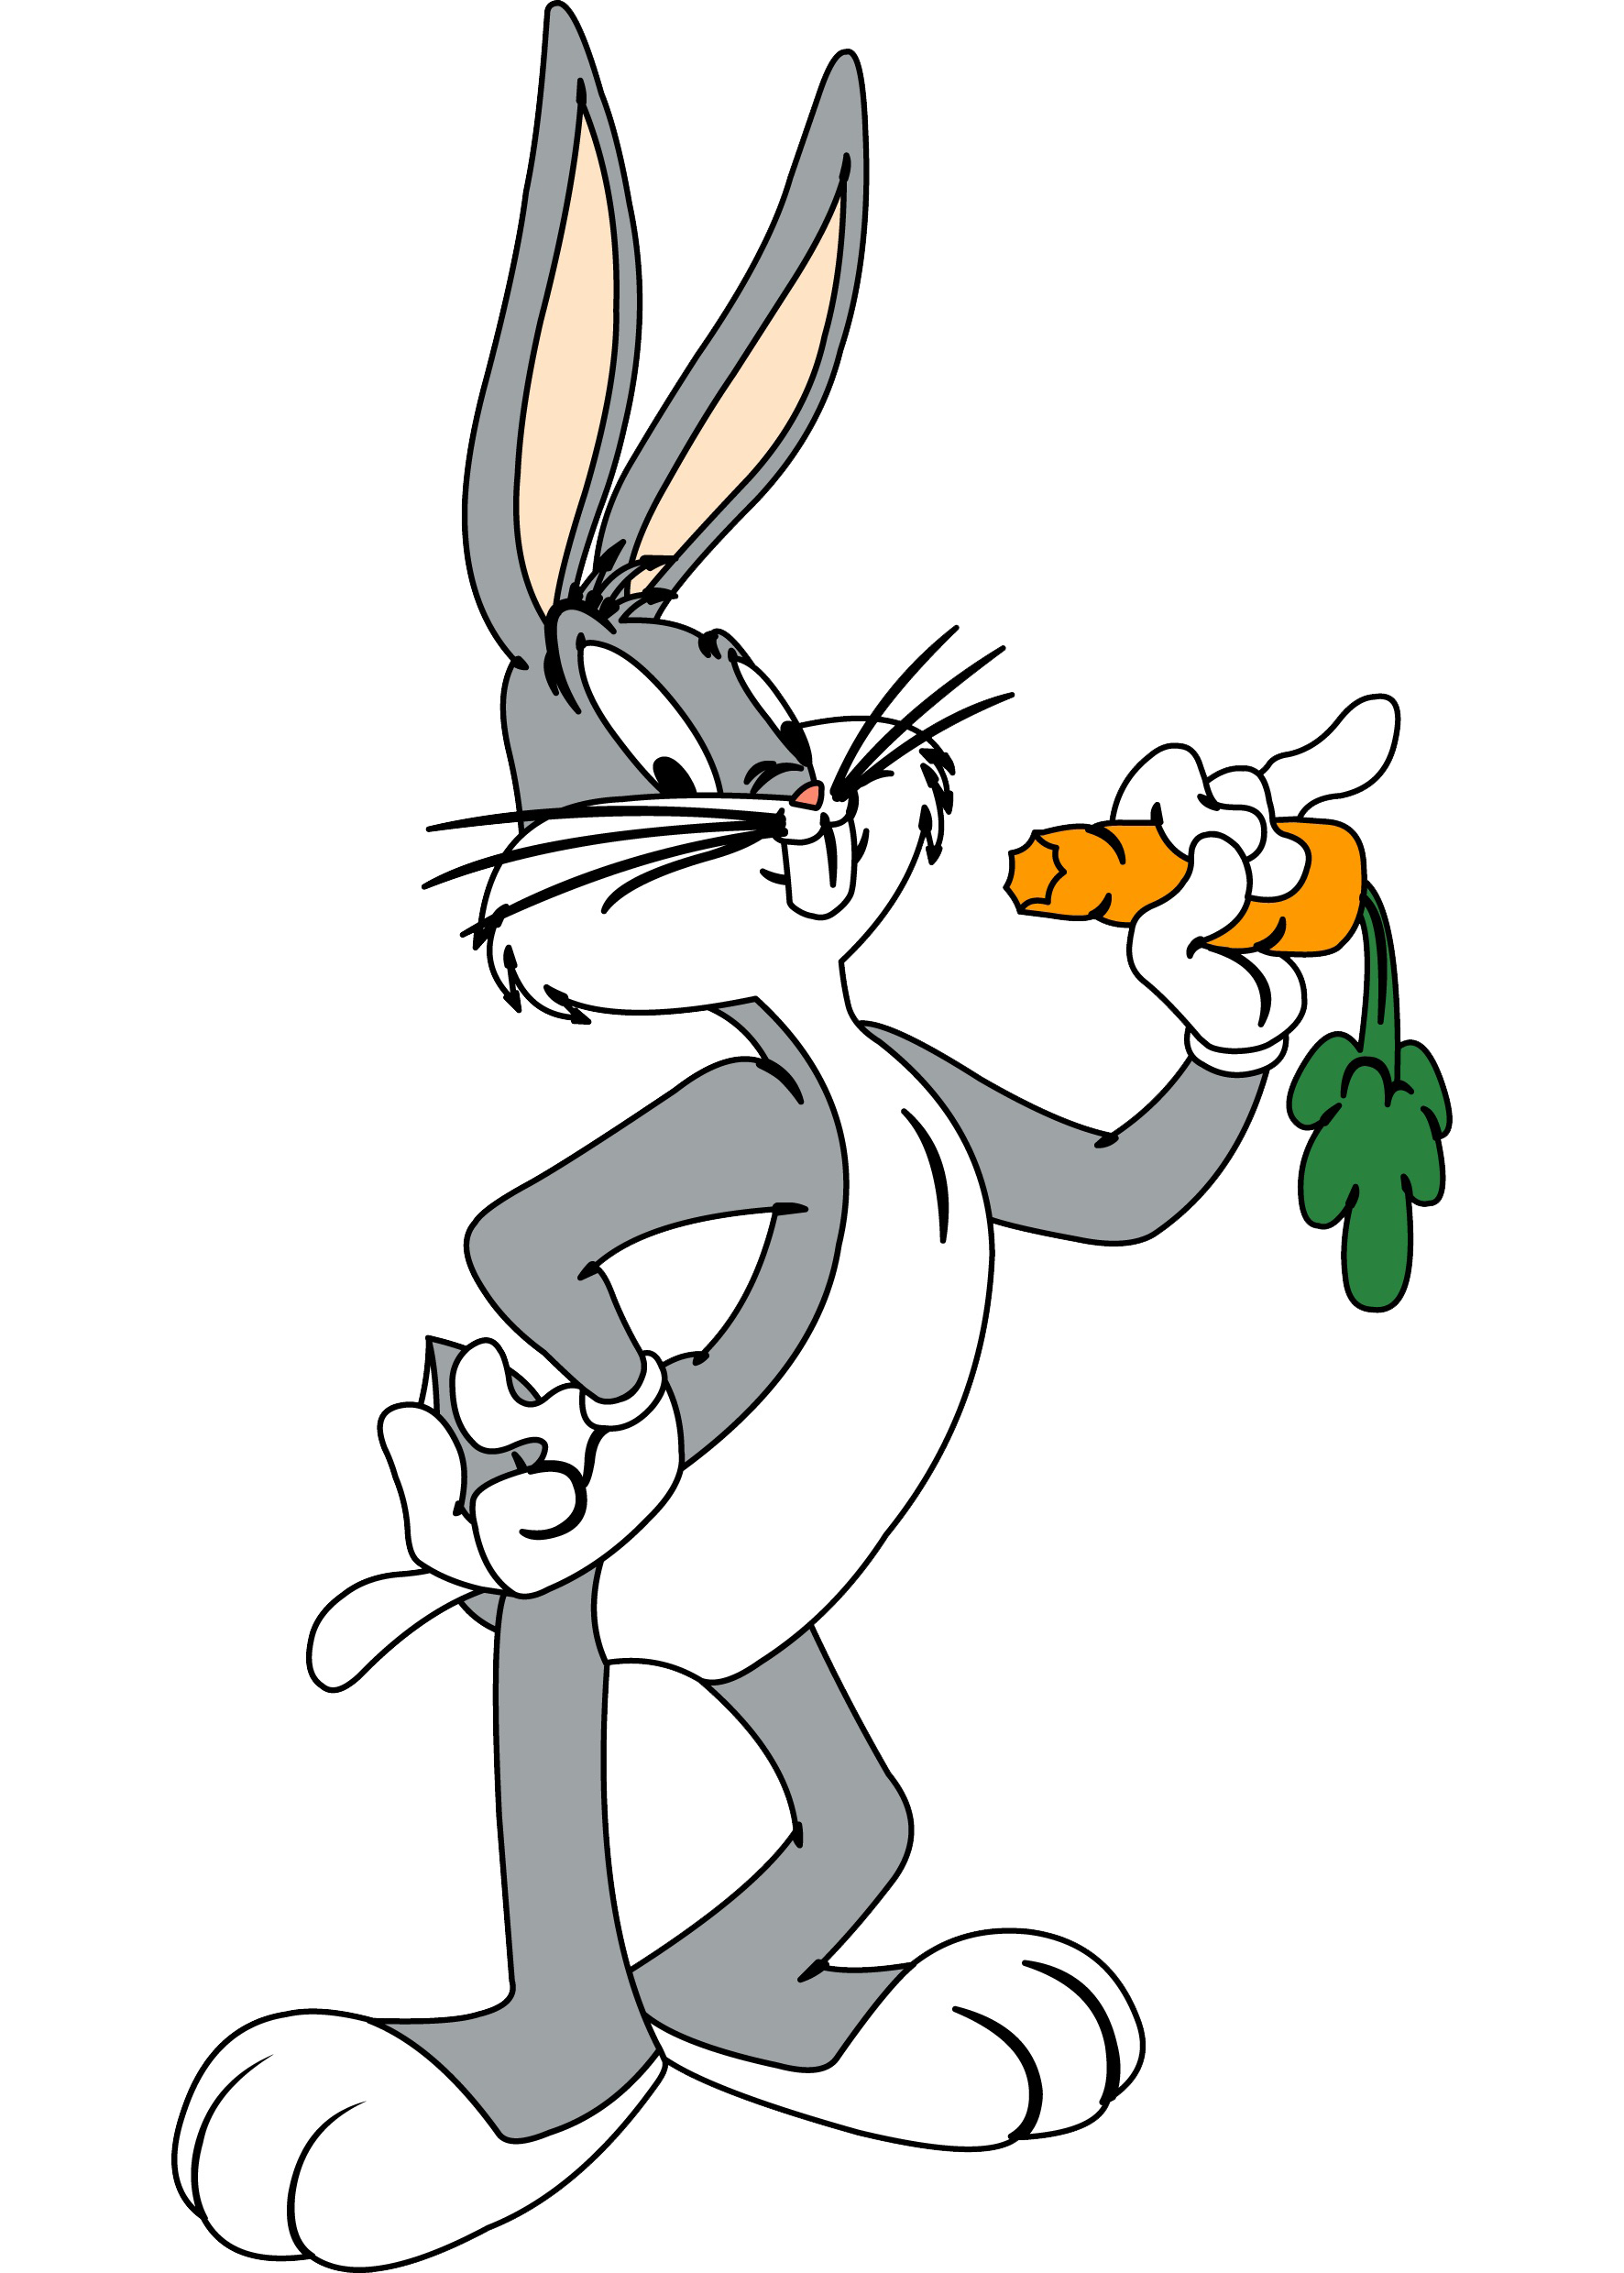 Image - Bugs Bunny.png  Heroes Wiki  FANDOM powered by Wikia